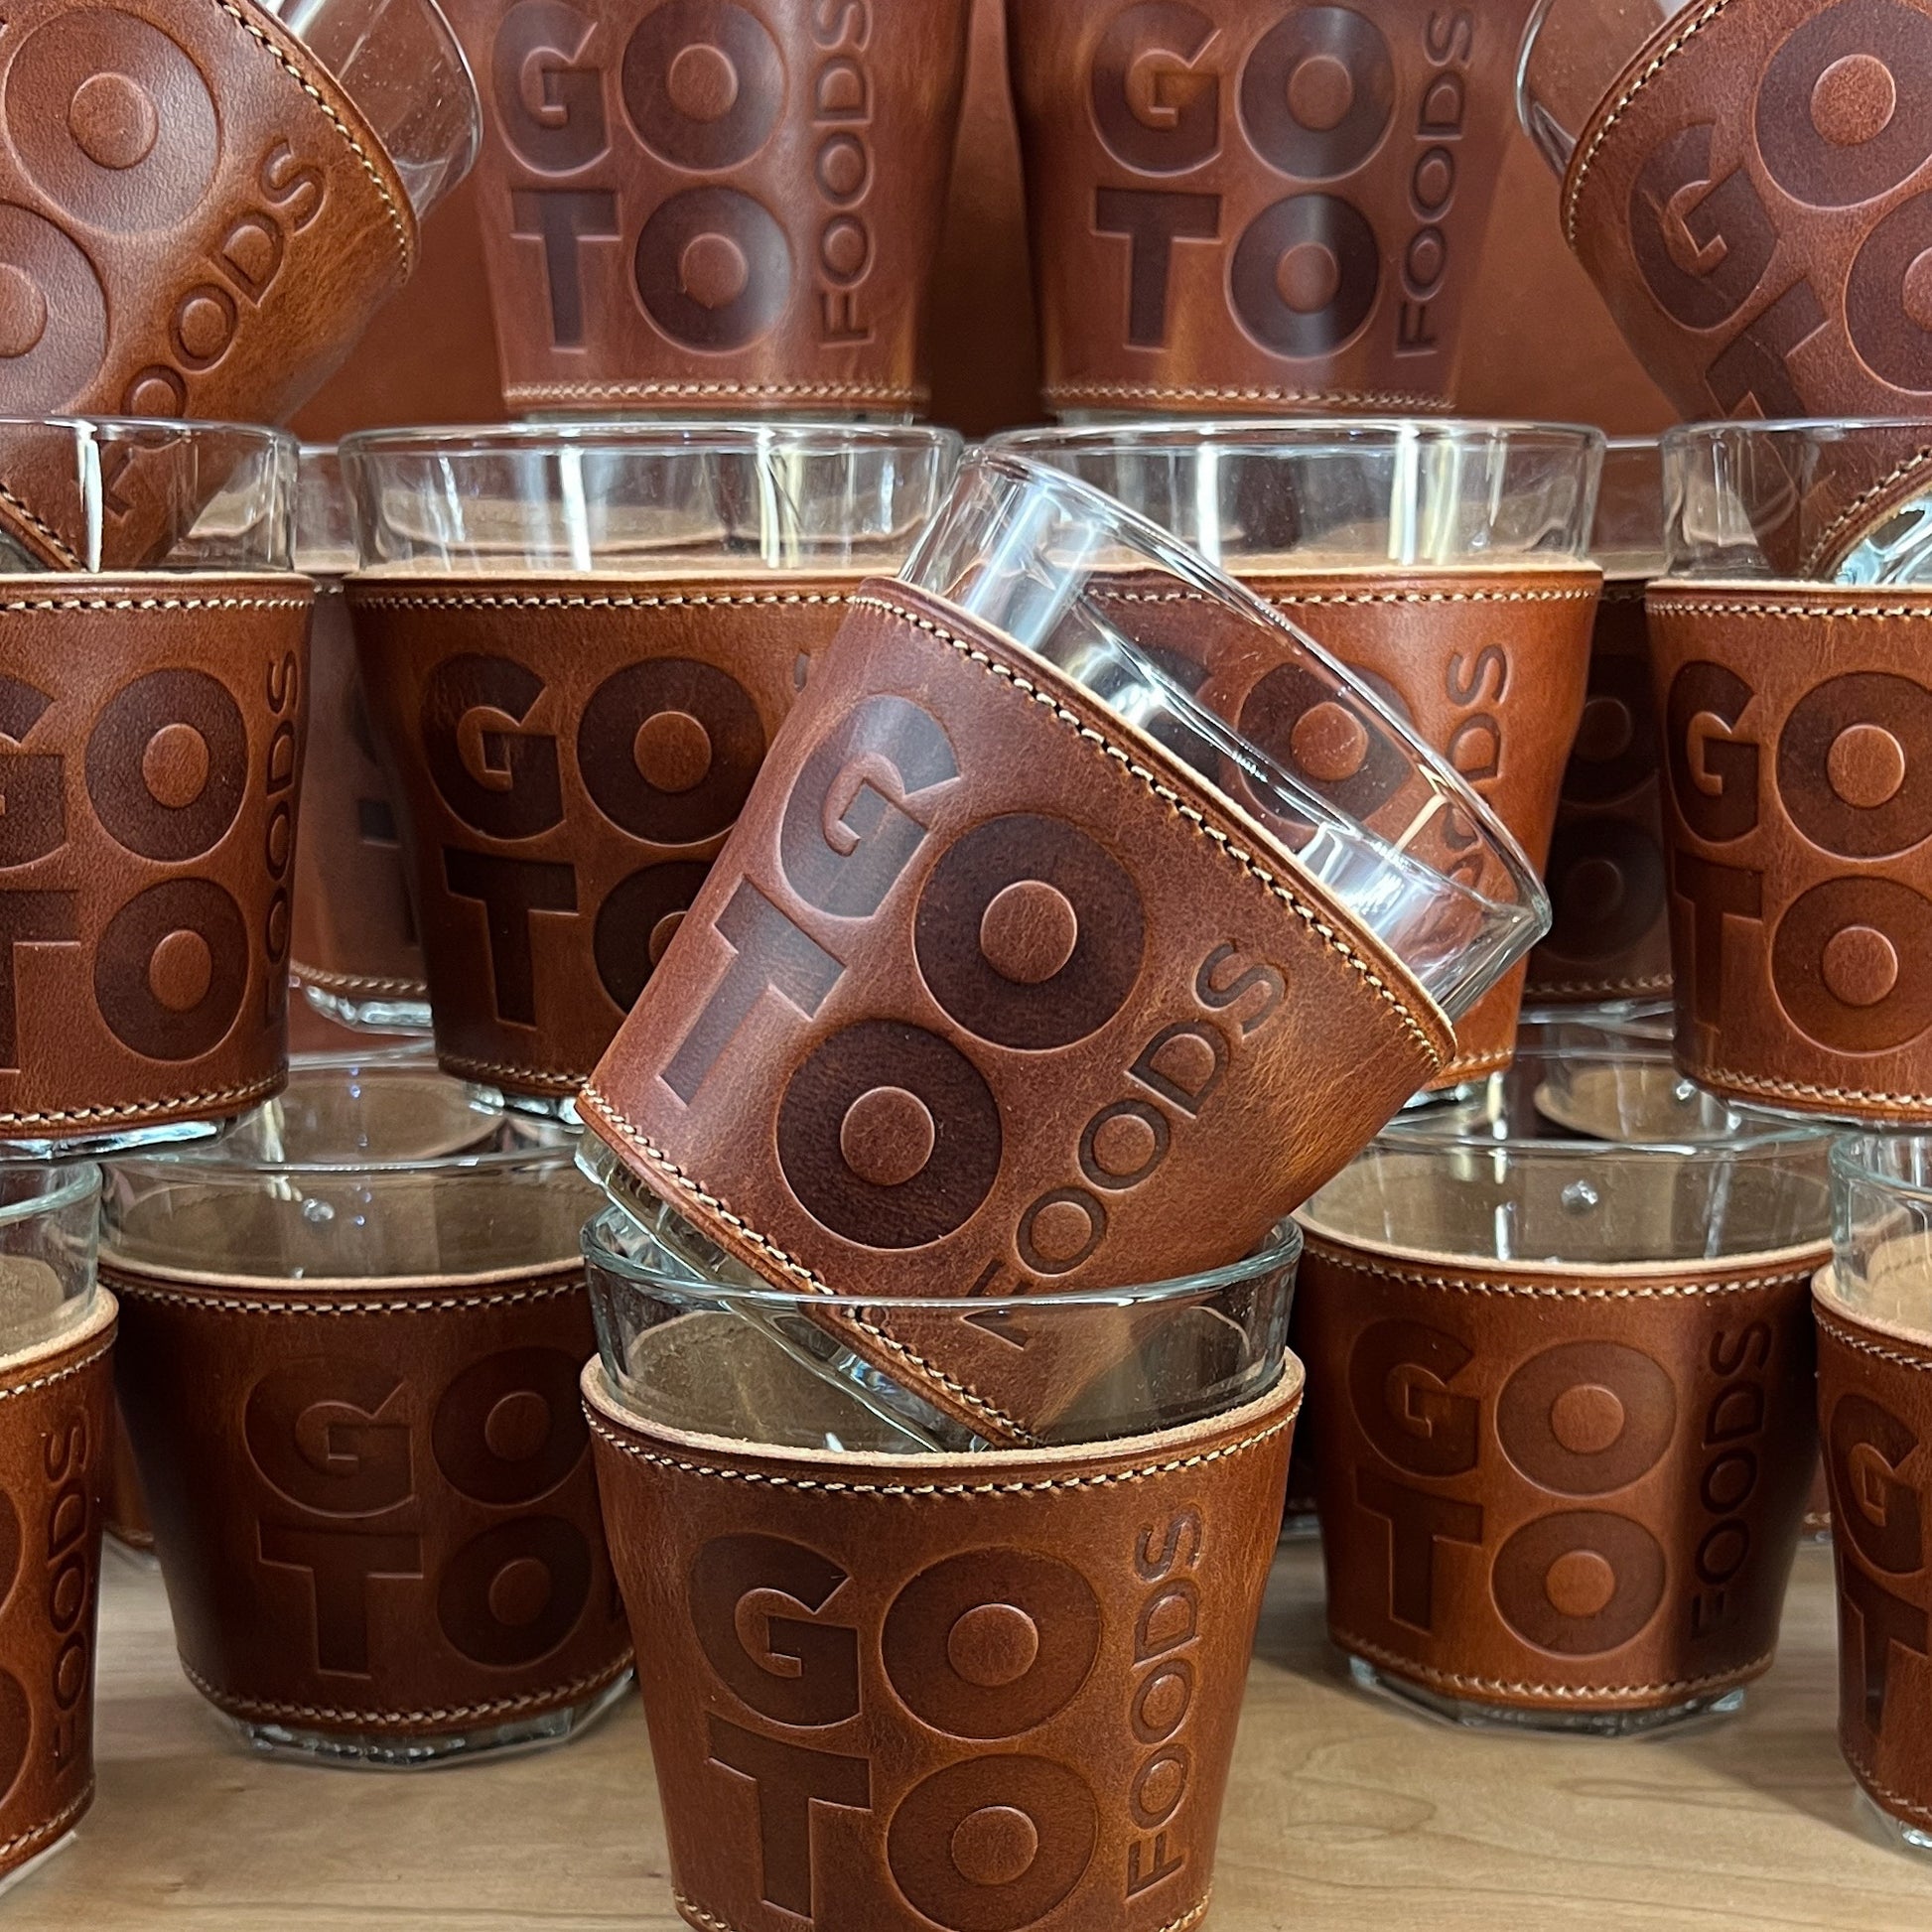 Promotional Whiskey Glass Gifts for a recent GOTO Foods conference.